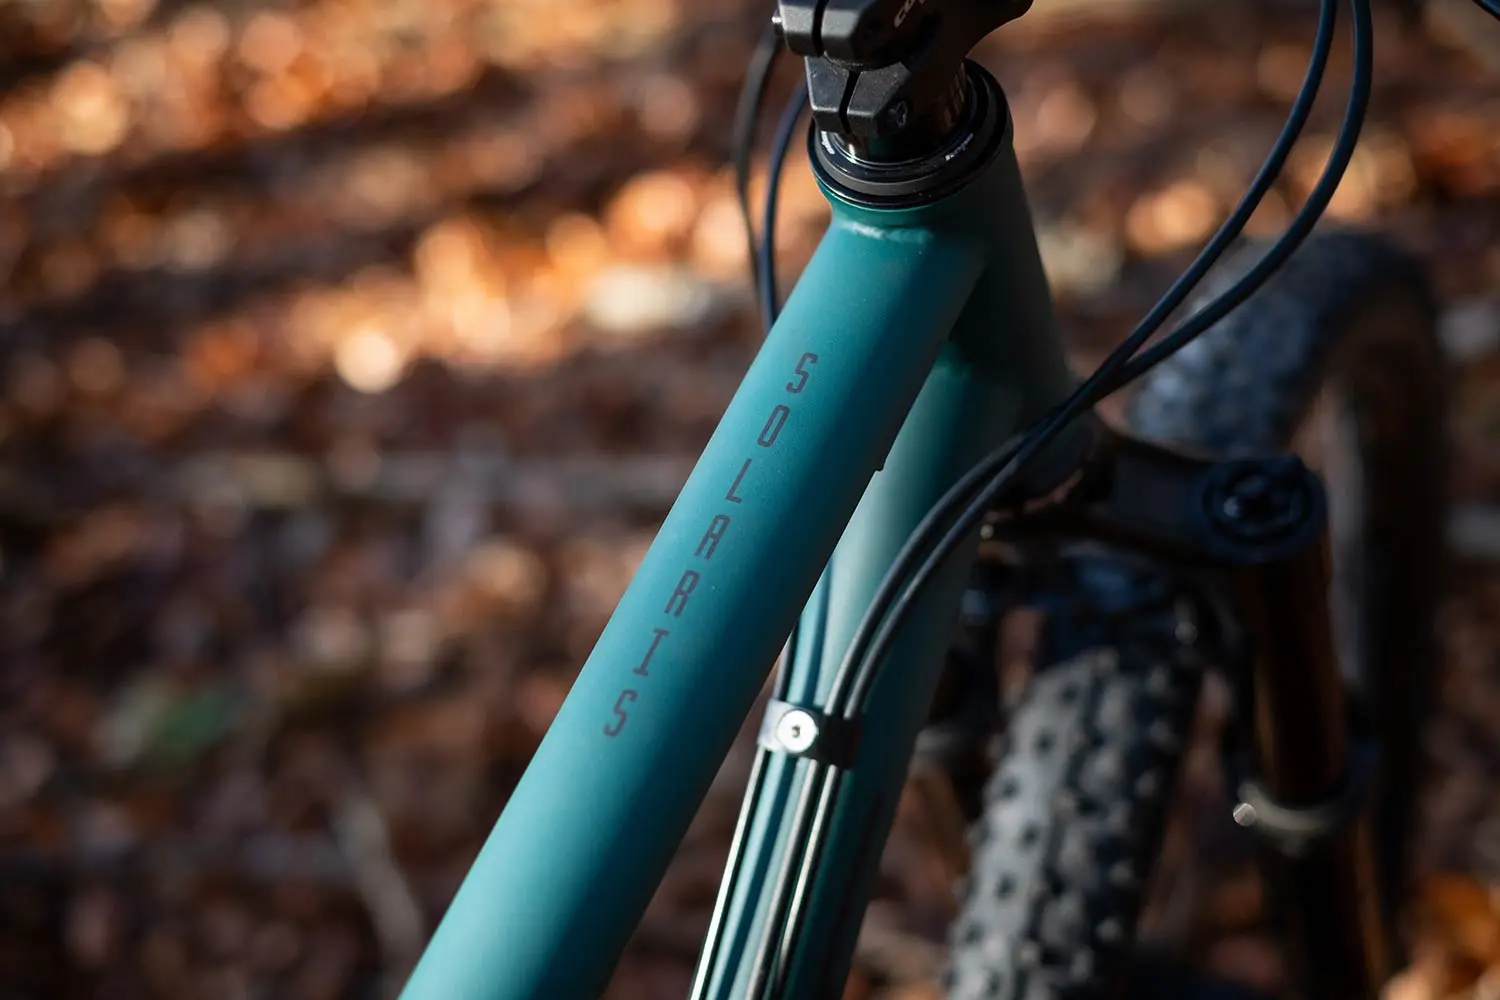 Cotic Solaris in Forest, 853 steel 29er hardtail